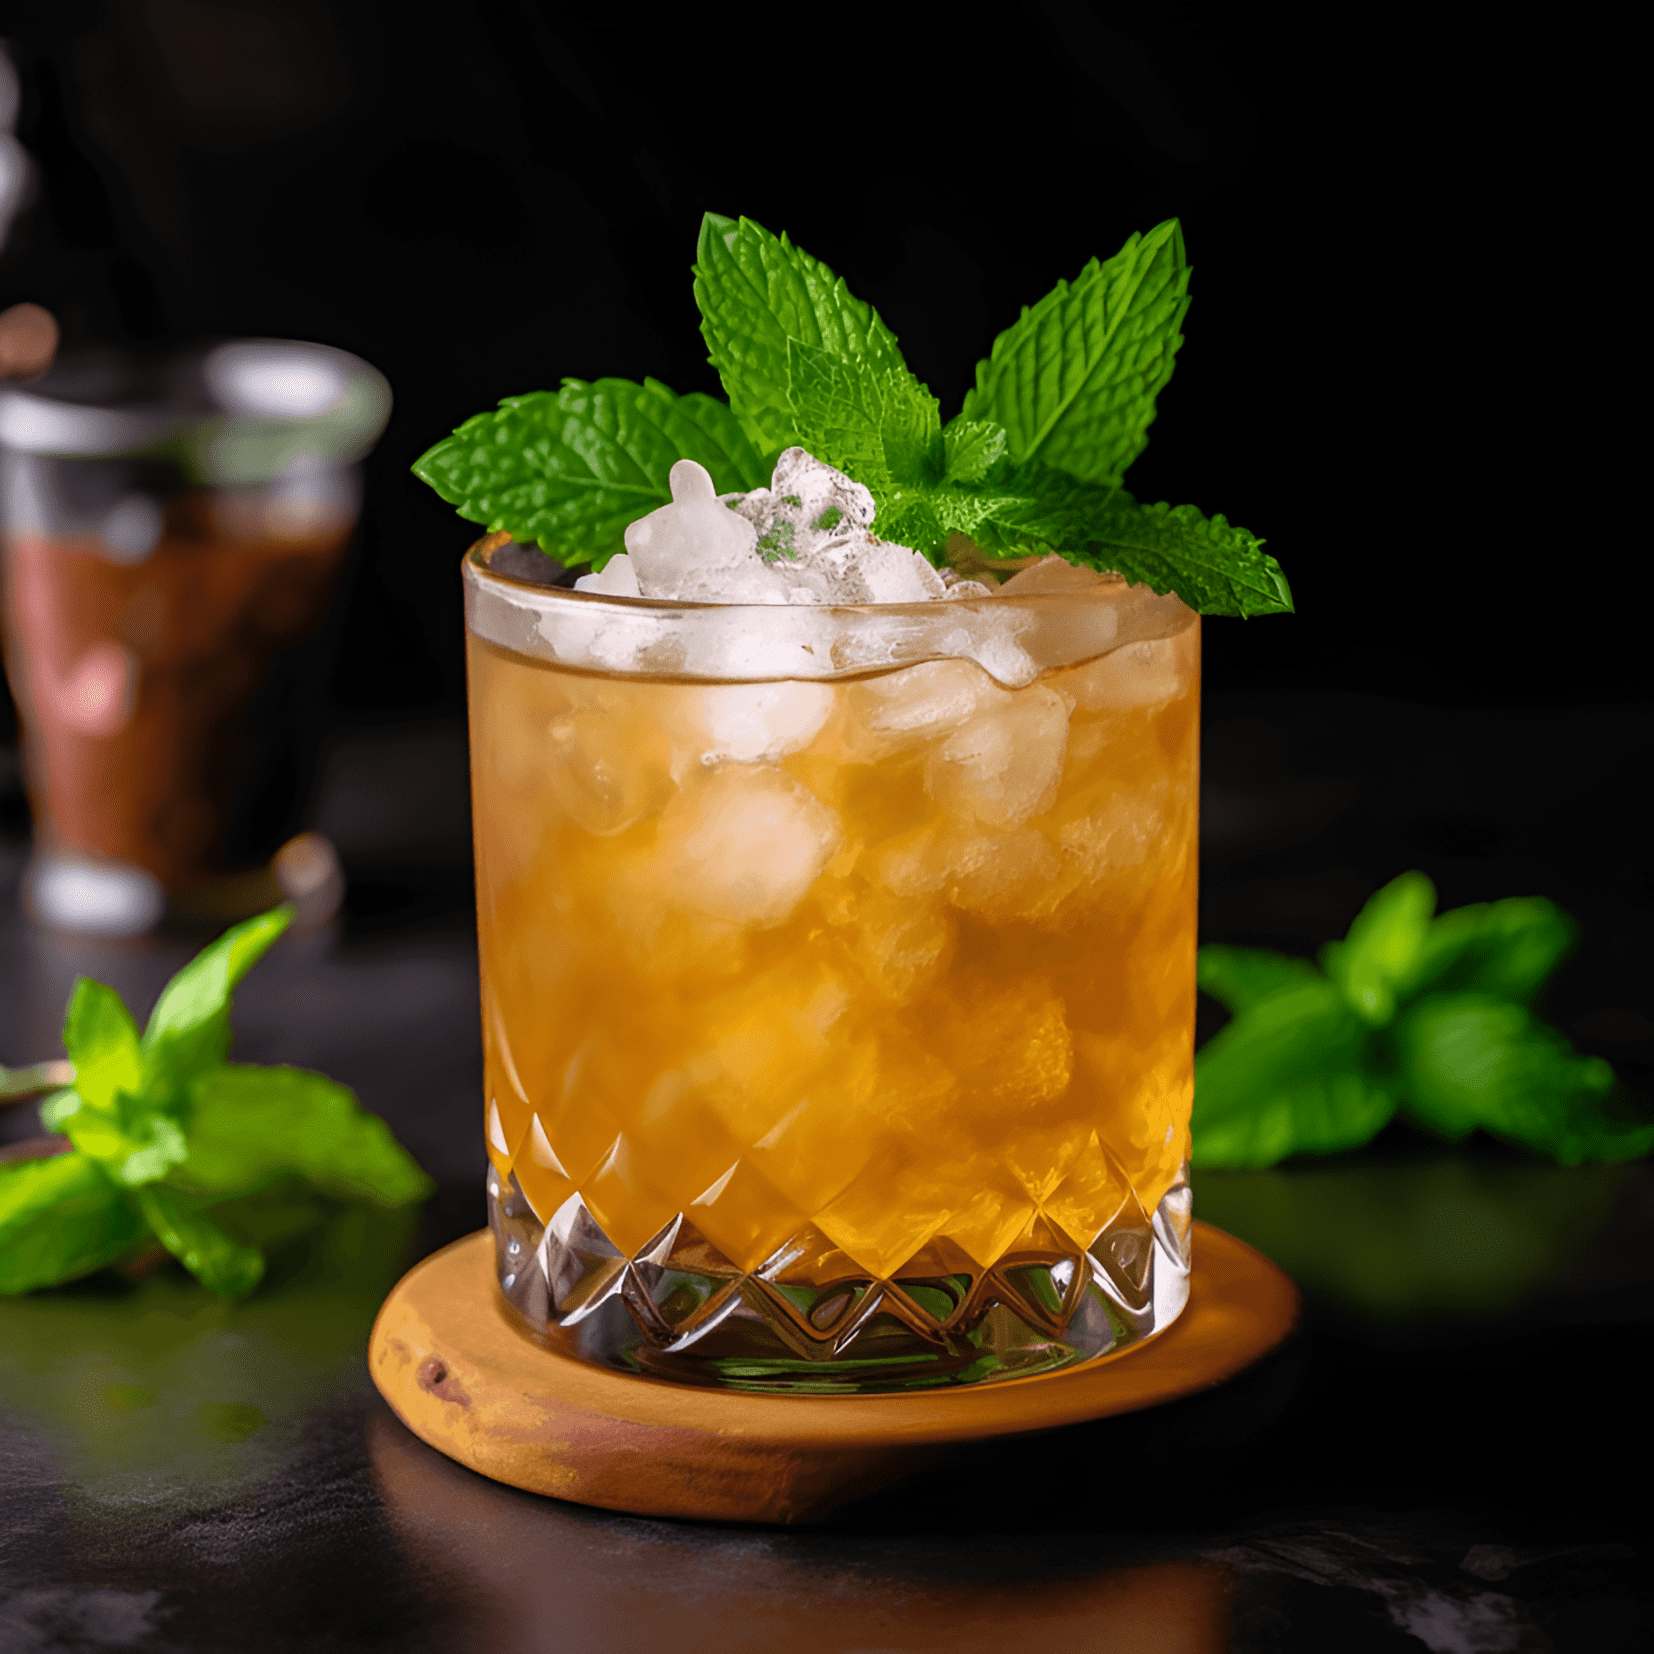 The Jet Pilot cocktail is a complex, flavorful drink with a perfect balance of sweet, sour, and spicy notes. It has a strong, boozy backbone with a hint of fruity sweetness, followed by a tangy citrus kick and a touch of warm, spiced undertones.